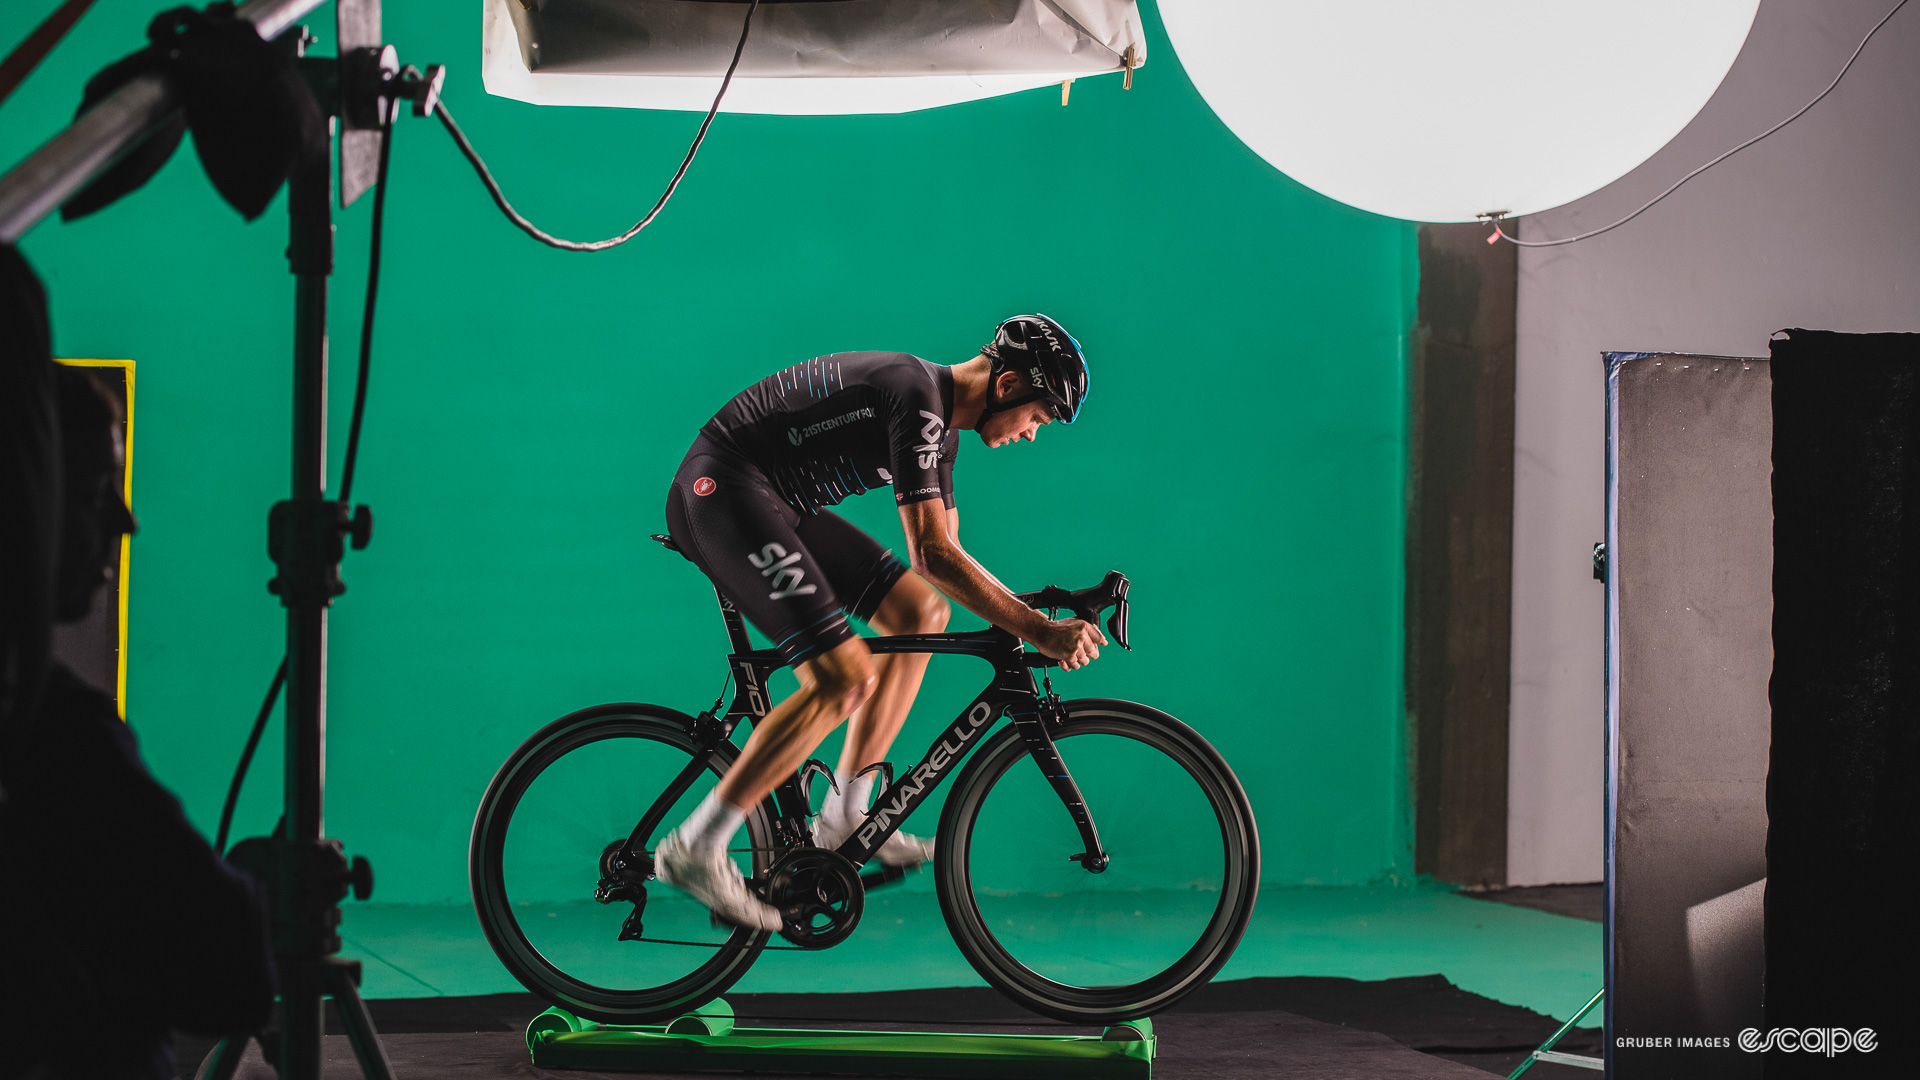 The photo shows Chris Froome riding a Pinarello F8 on rollers in front of a green screen